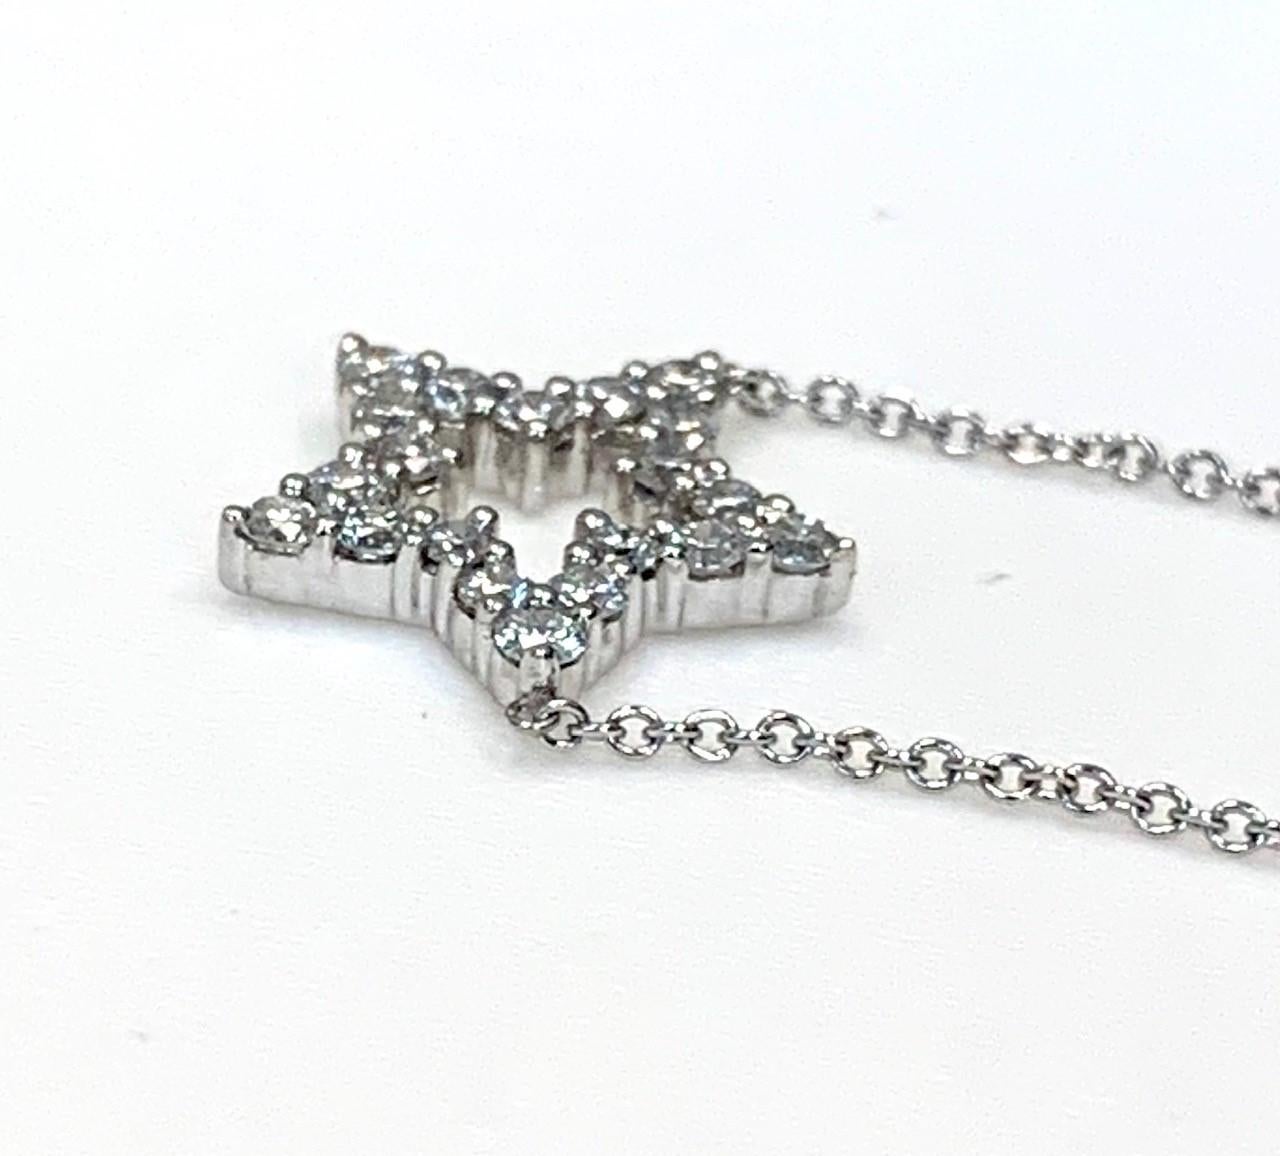 Show the world you're a star! This pretty, little sparkler is set with round brilliant cut diamonds set in 18k white gold for a look that will always remind you how special you are! Time to treat yourself!

Necklace is 16 inches in length
21 round